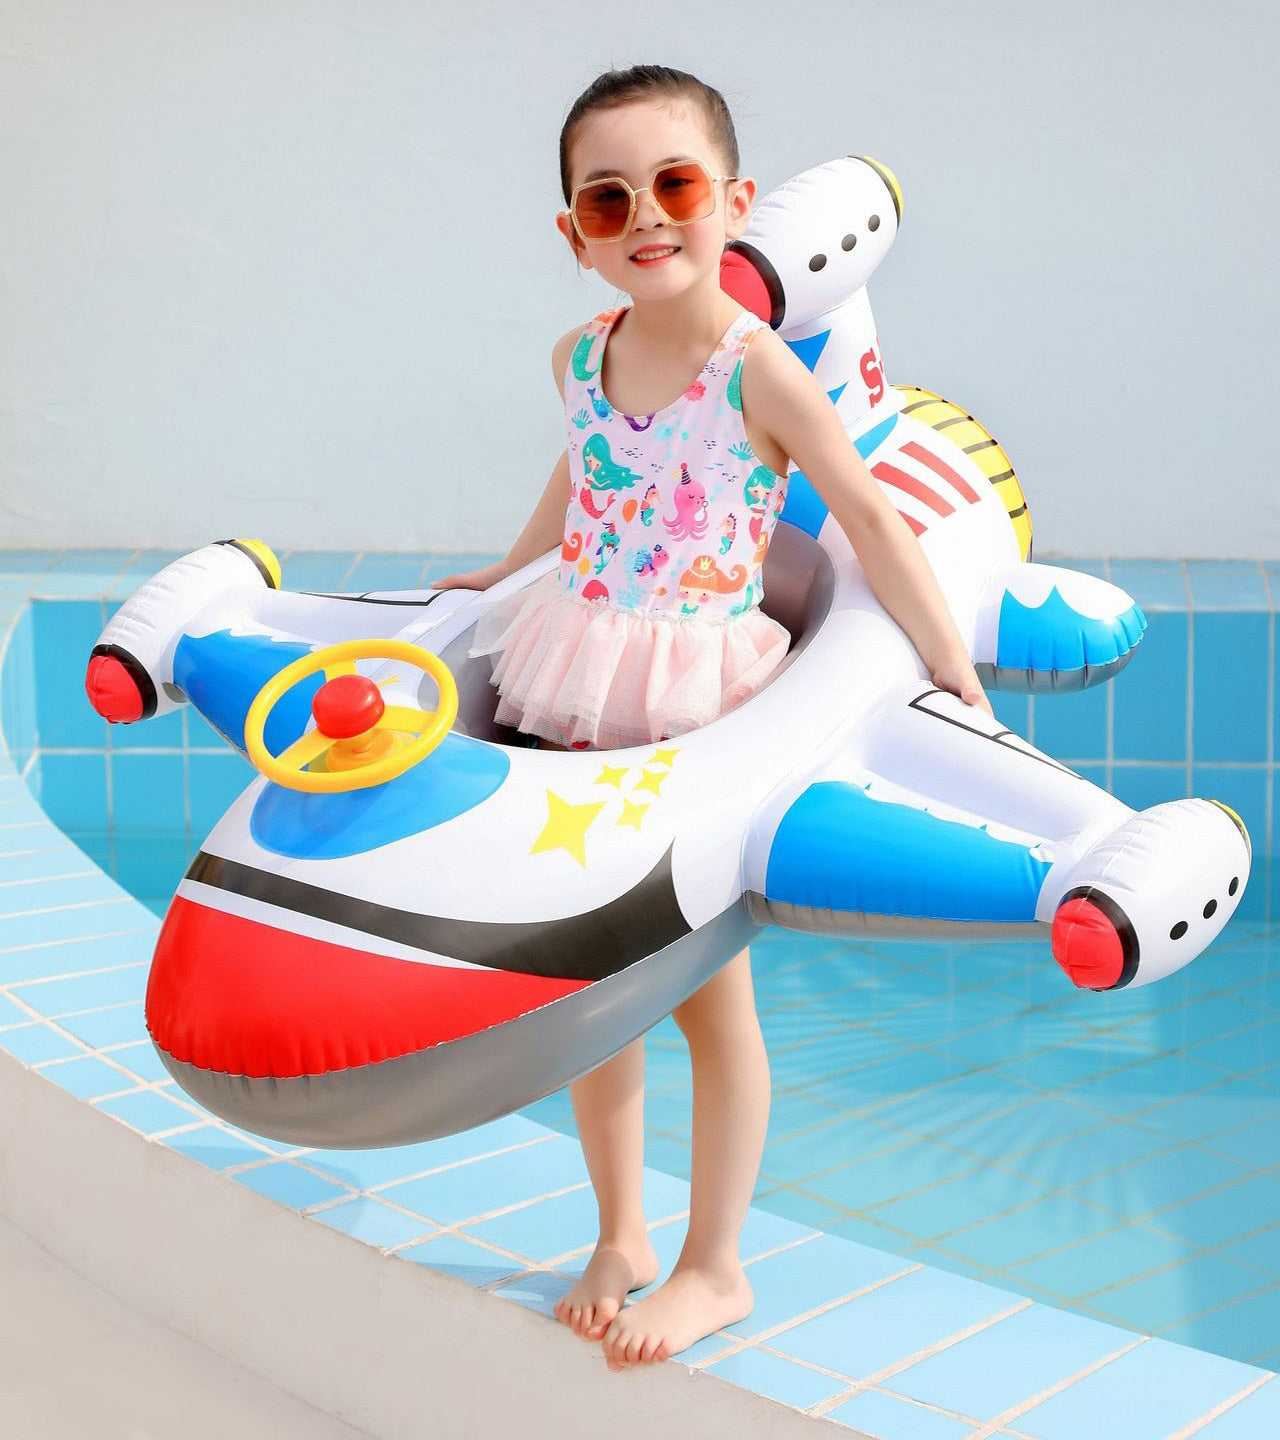 Rooxin Kids Inflatable Airplane Beach Toy